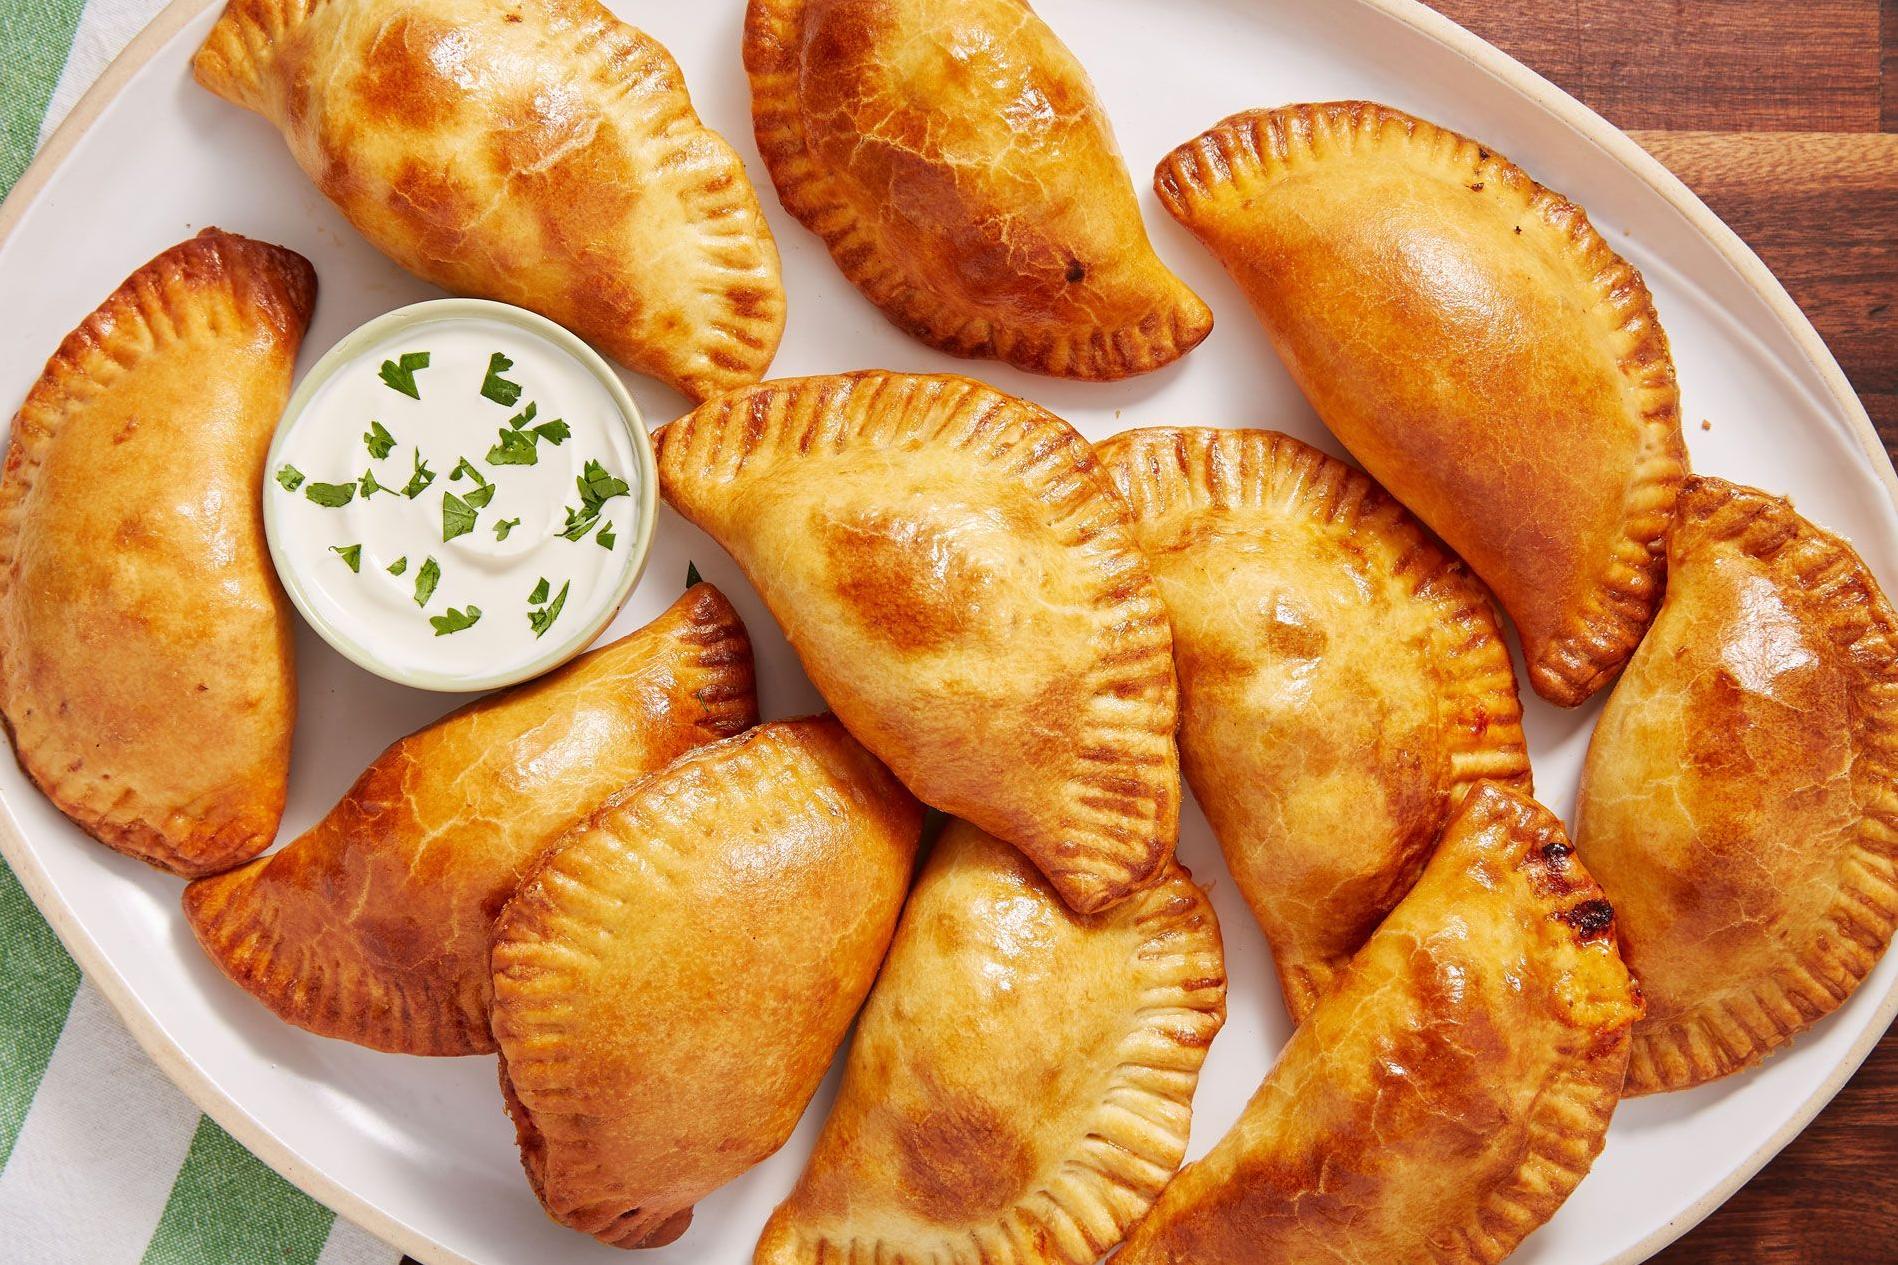  Satisfy your hunger with a plateful of these delicious meaty empanadas!